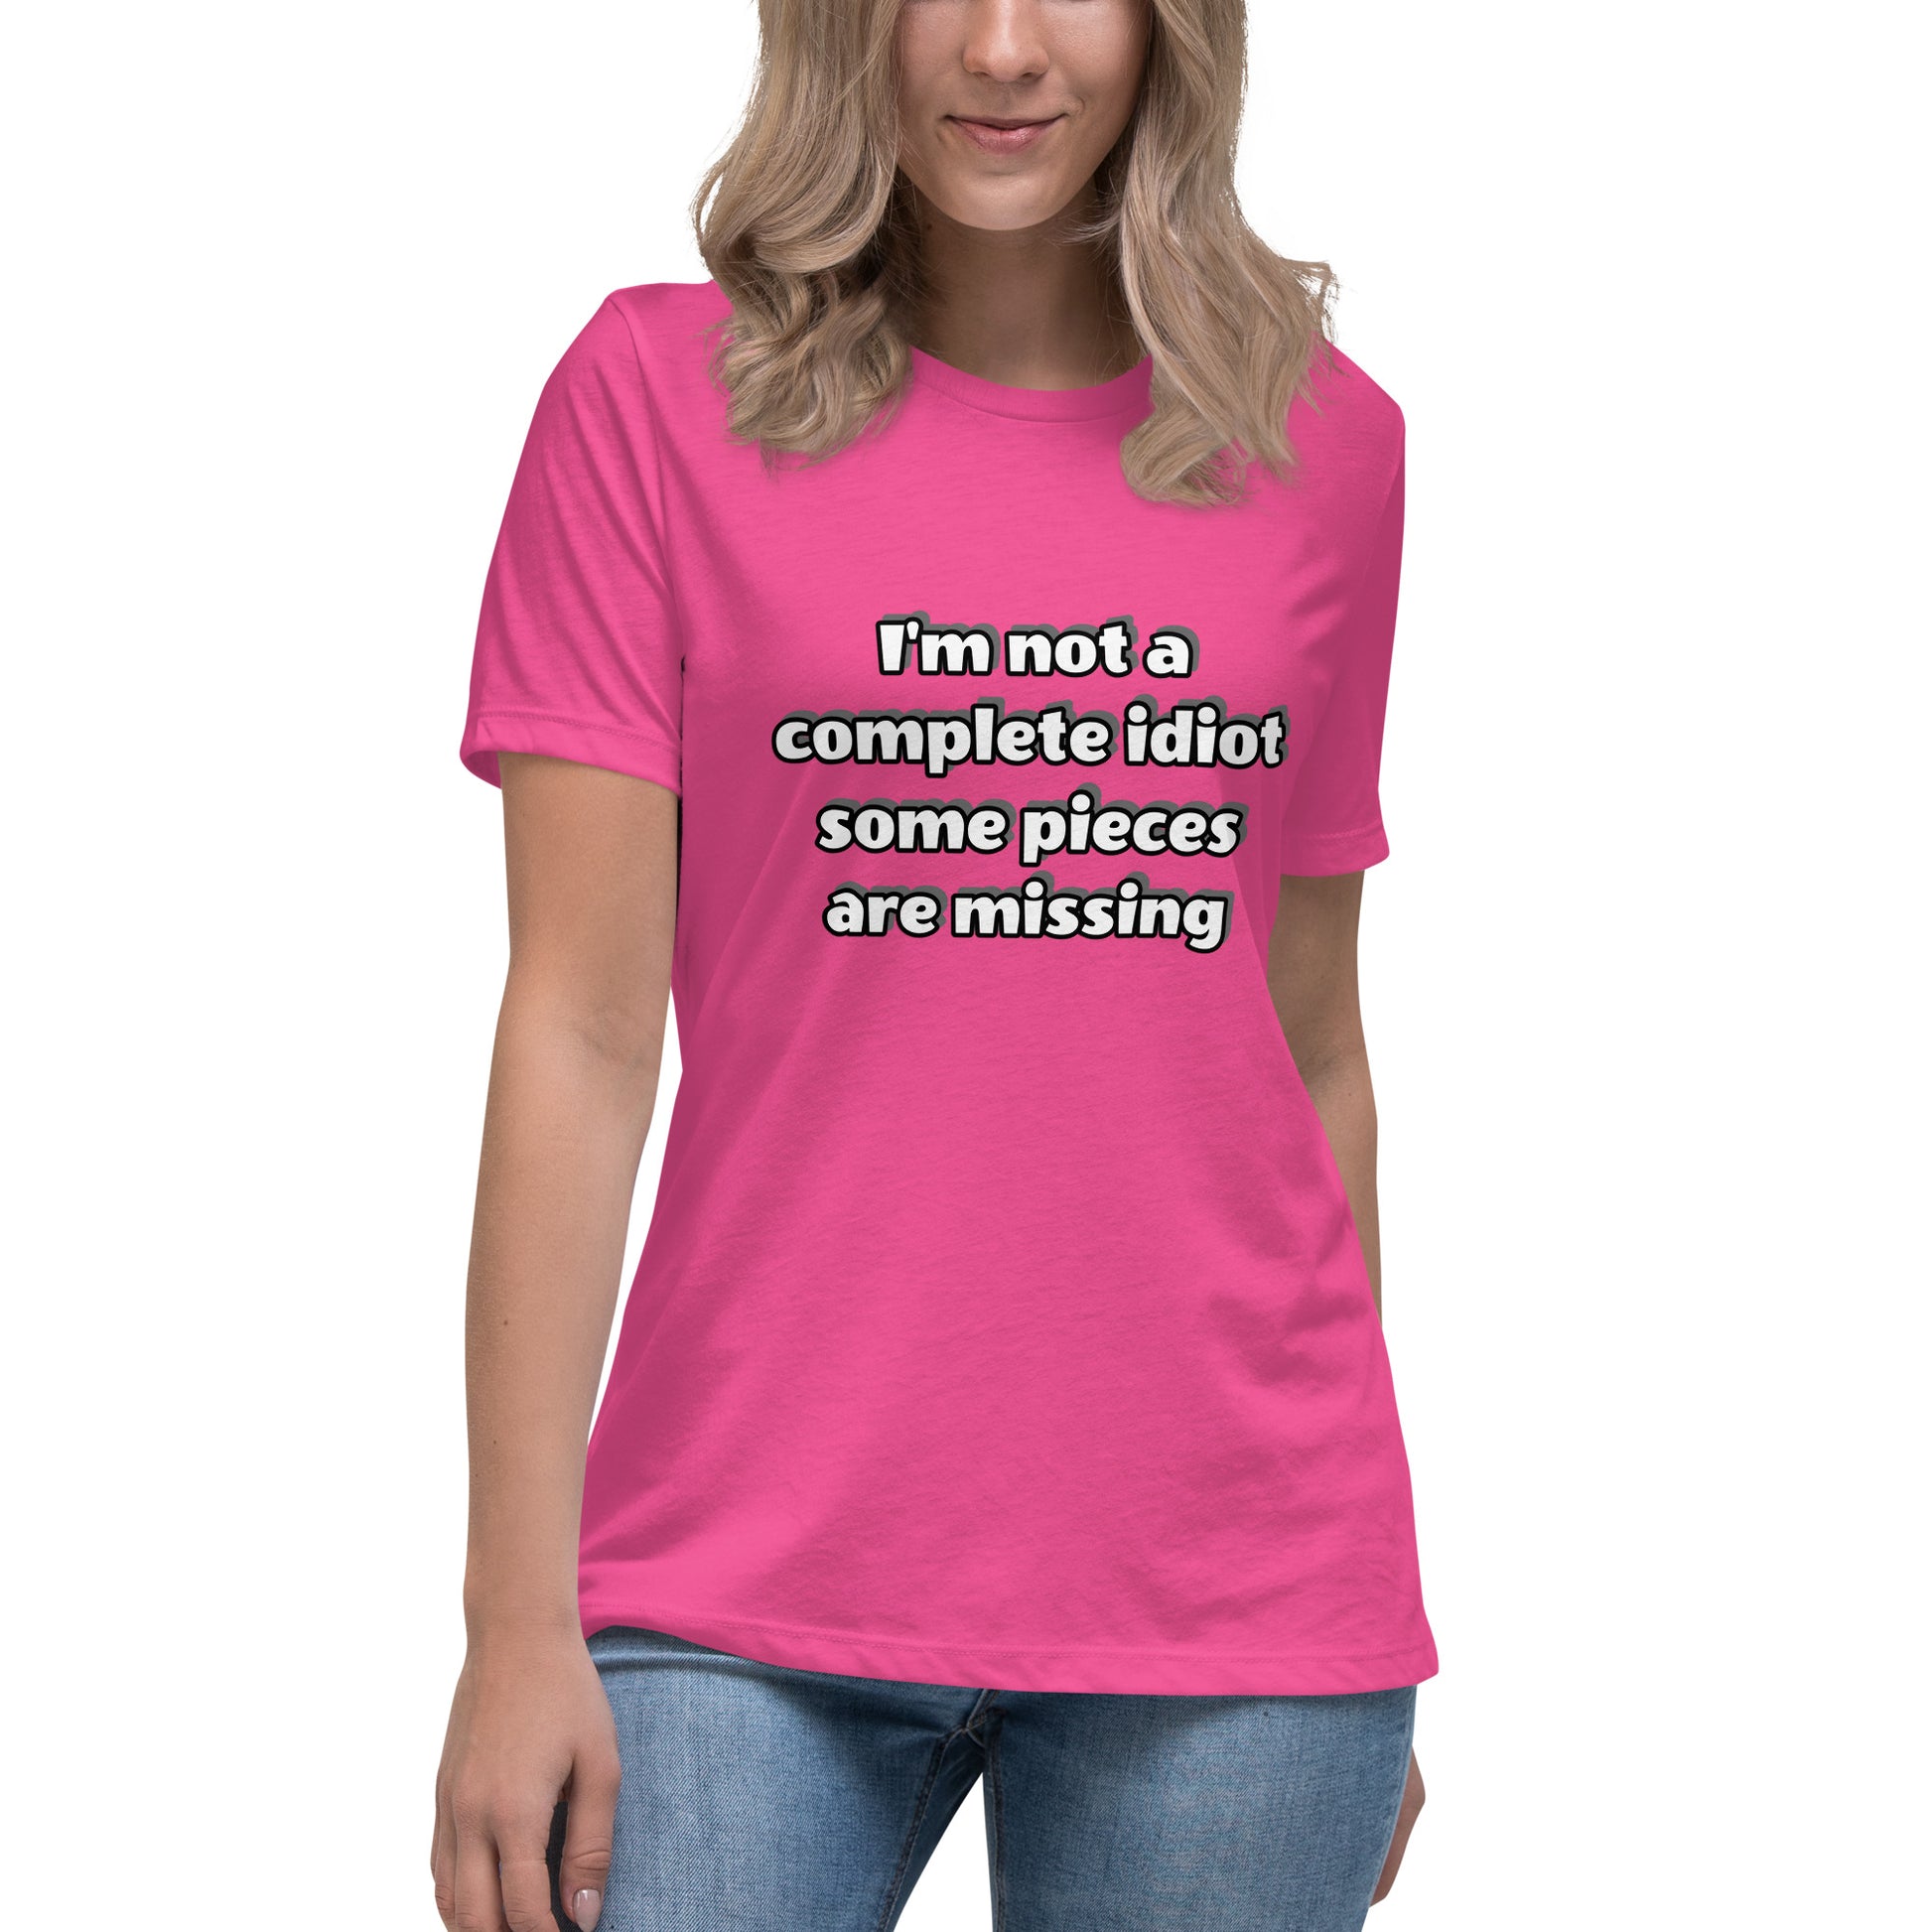 Women with berry t-shirt with text “I’m not a complete idiot, some pieces are missing”